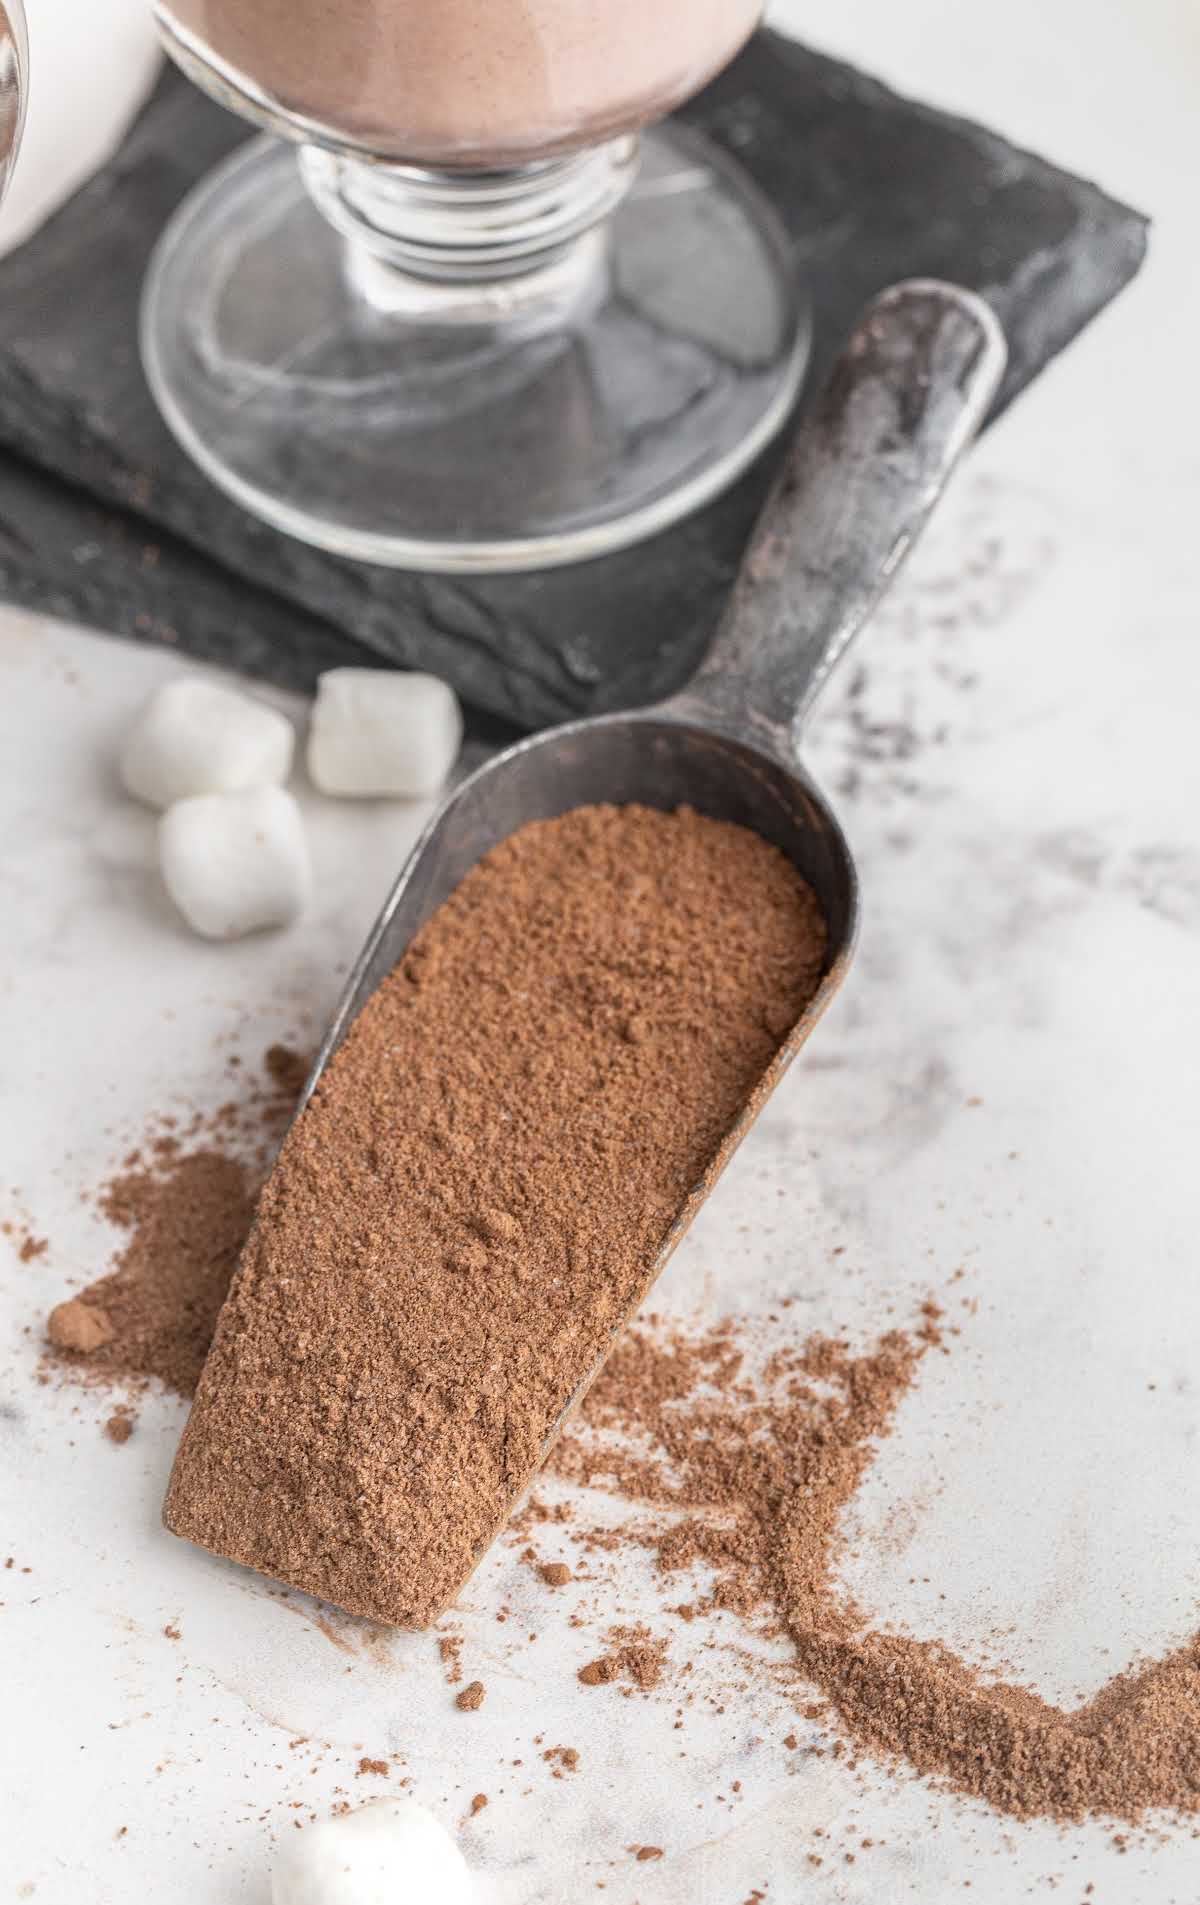 hot chocolate mix ingredients in a scooper